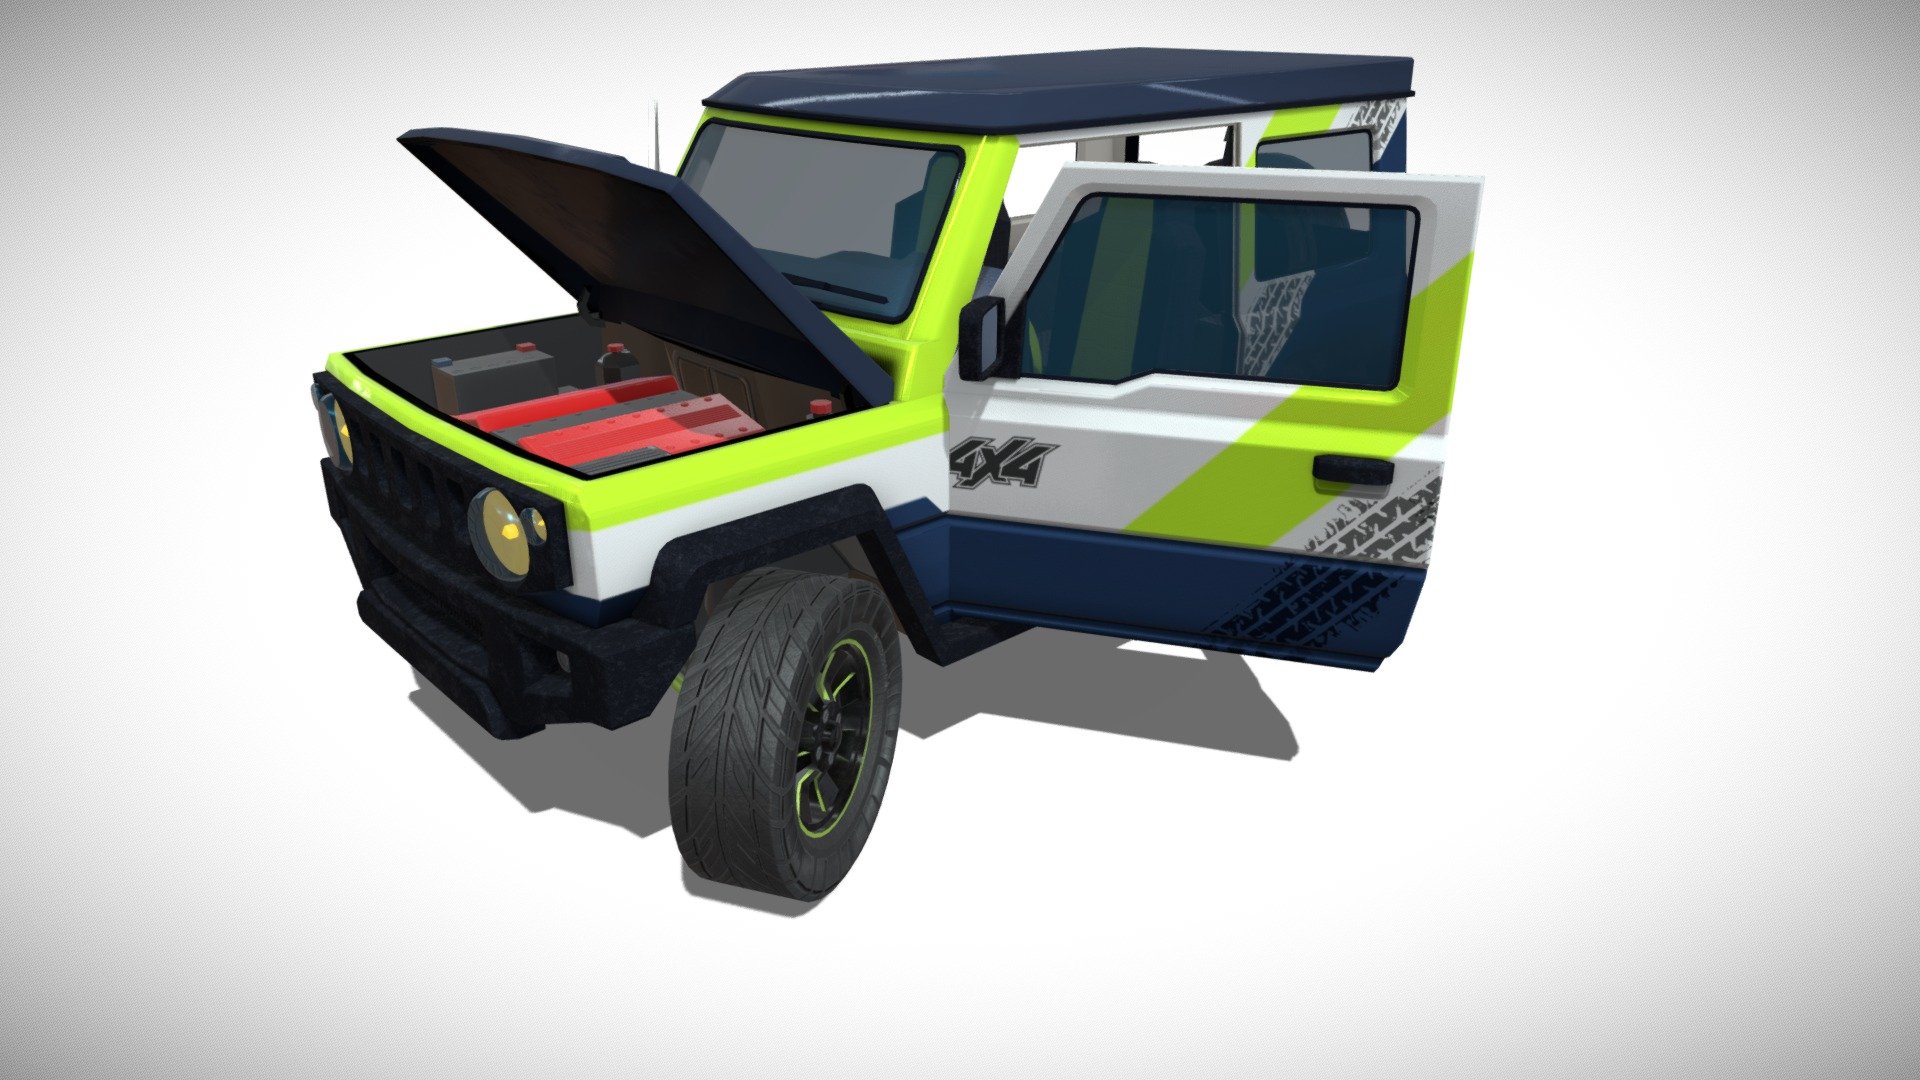 Jeep Suzuki Jimny 4x4 car

The additional files include the asset as FBX, OBJ file formats. Also included is the original Blender file with all of the individual parts used for modelling the asset.

Texture 4K

Vertices 11.054

Edges 21.392

Faces 10.417

Triangles 19.126



 - Jeep Suzuki Jimny 4x4 car - Buy Royalty Free 3D model by Egor Liashchuk (@egorliashchuk) 3d model